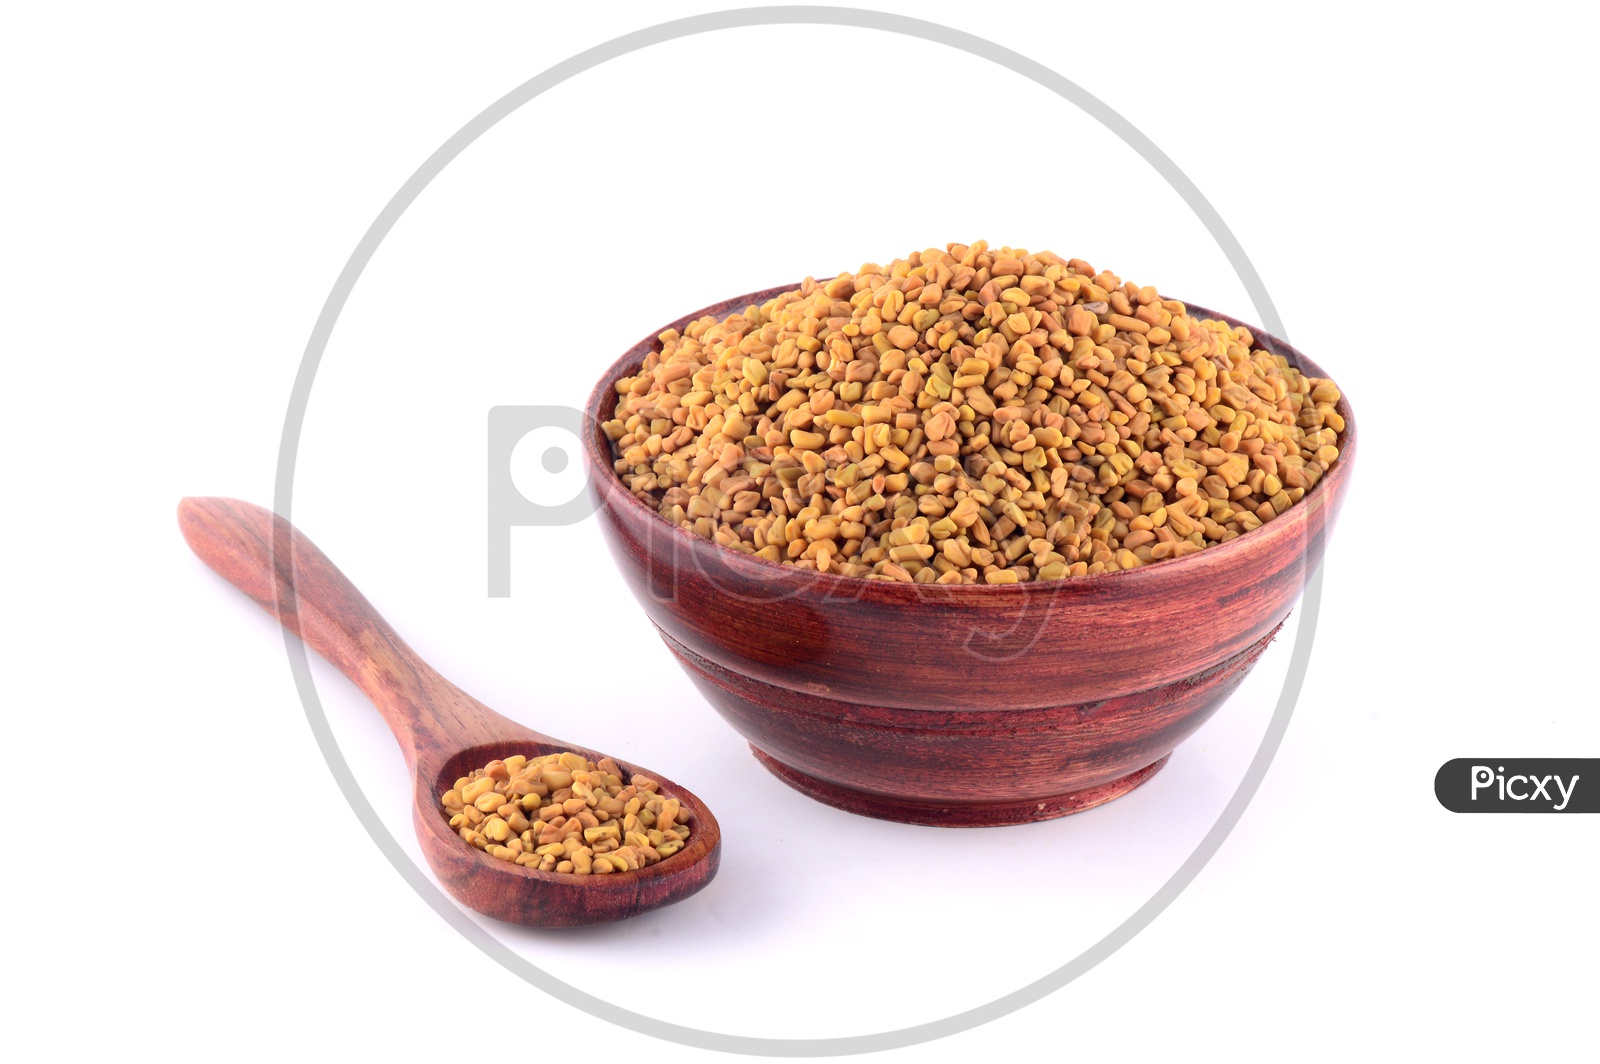 Fenugreek seeds in wooden bowl and spoon isolated on white background